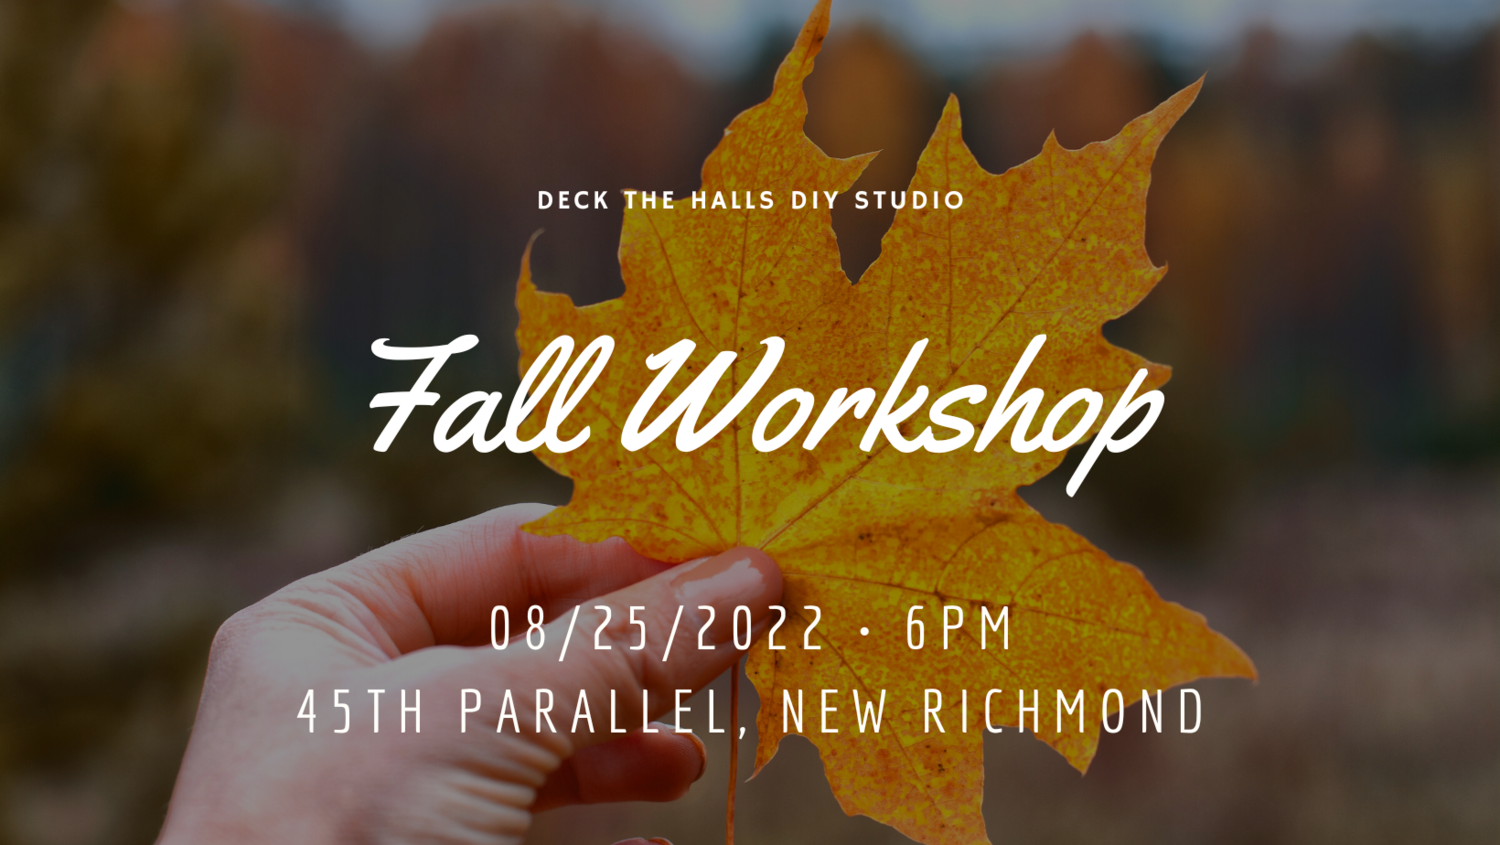 Fall Workshop, Aug 25, 45th Parallel